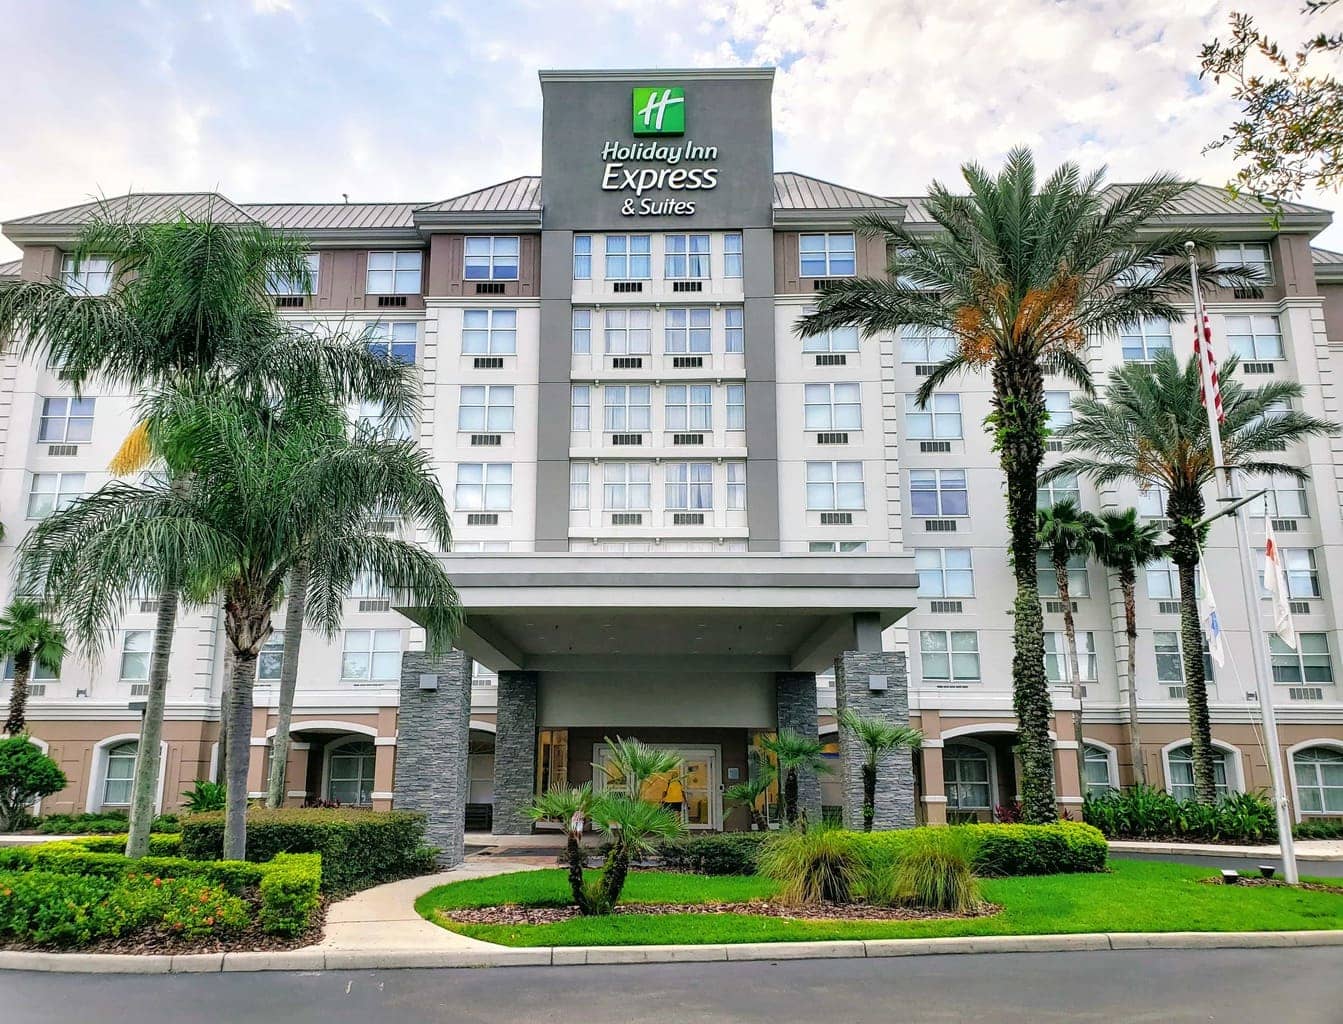 Holiday Inn Express & Suites in Kissimmee, Affordable Hotels near Disney World